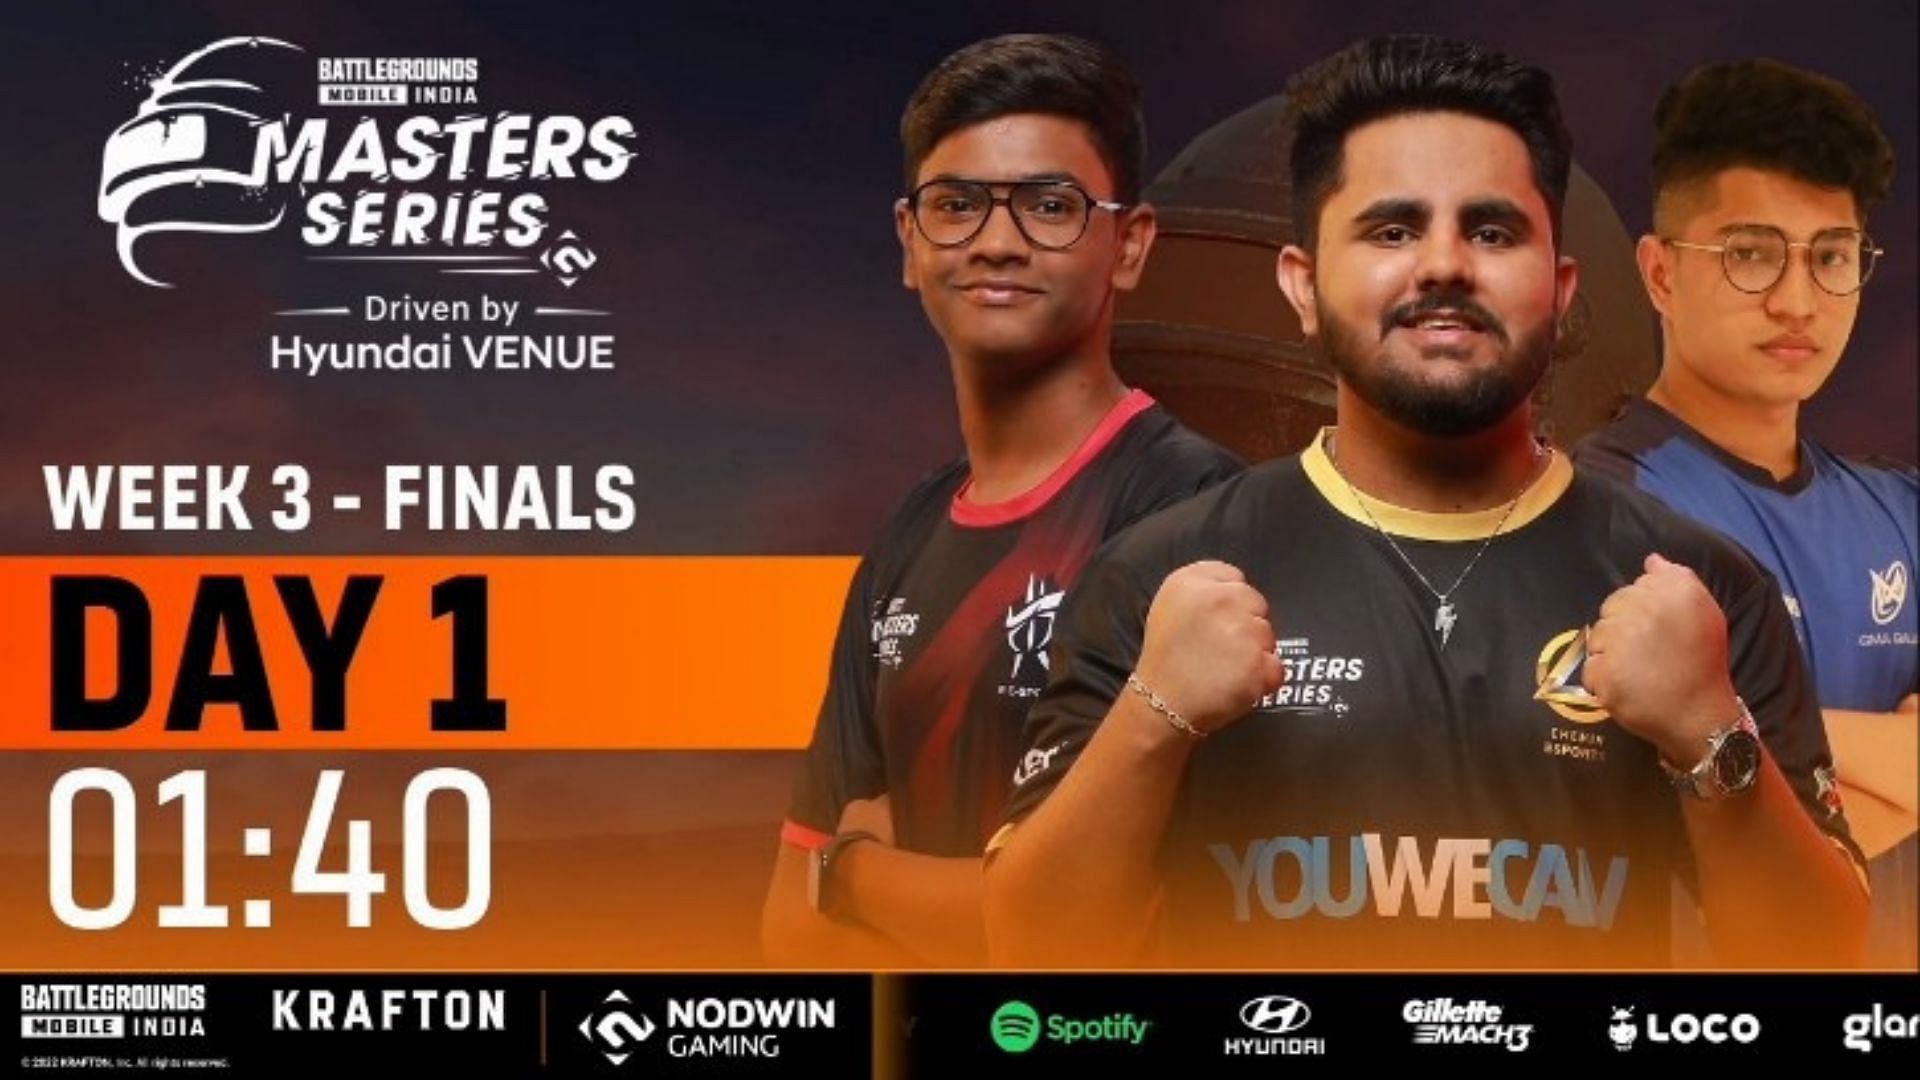 BGMI Masters Series Week 3 Finals Day 1 came to a close on July 8 (image via Loco)